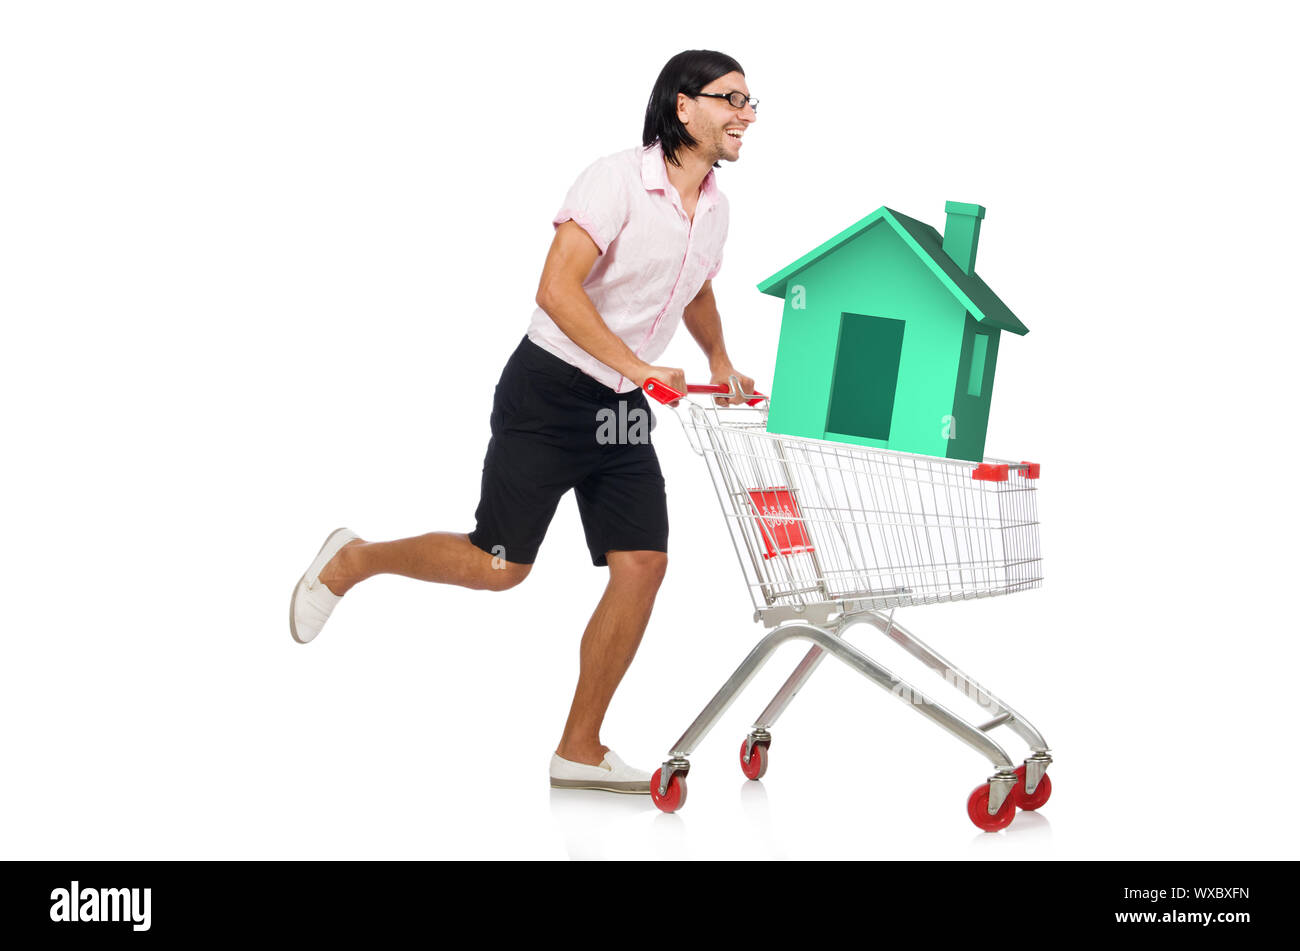 Man in real estate buying concept Stock Photo